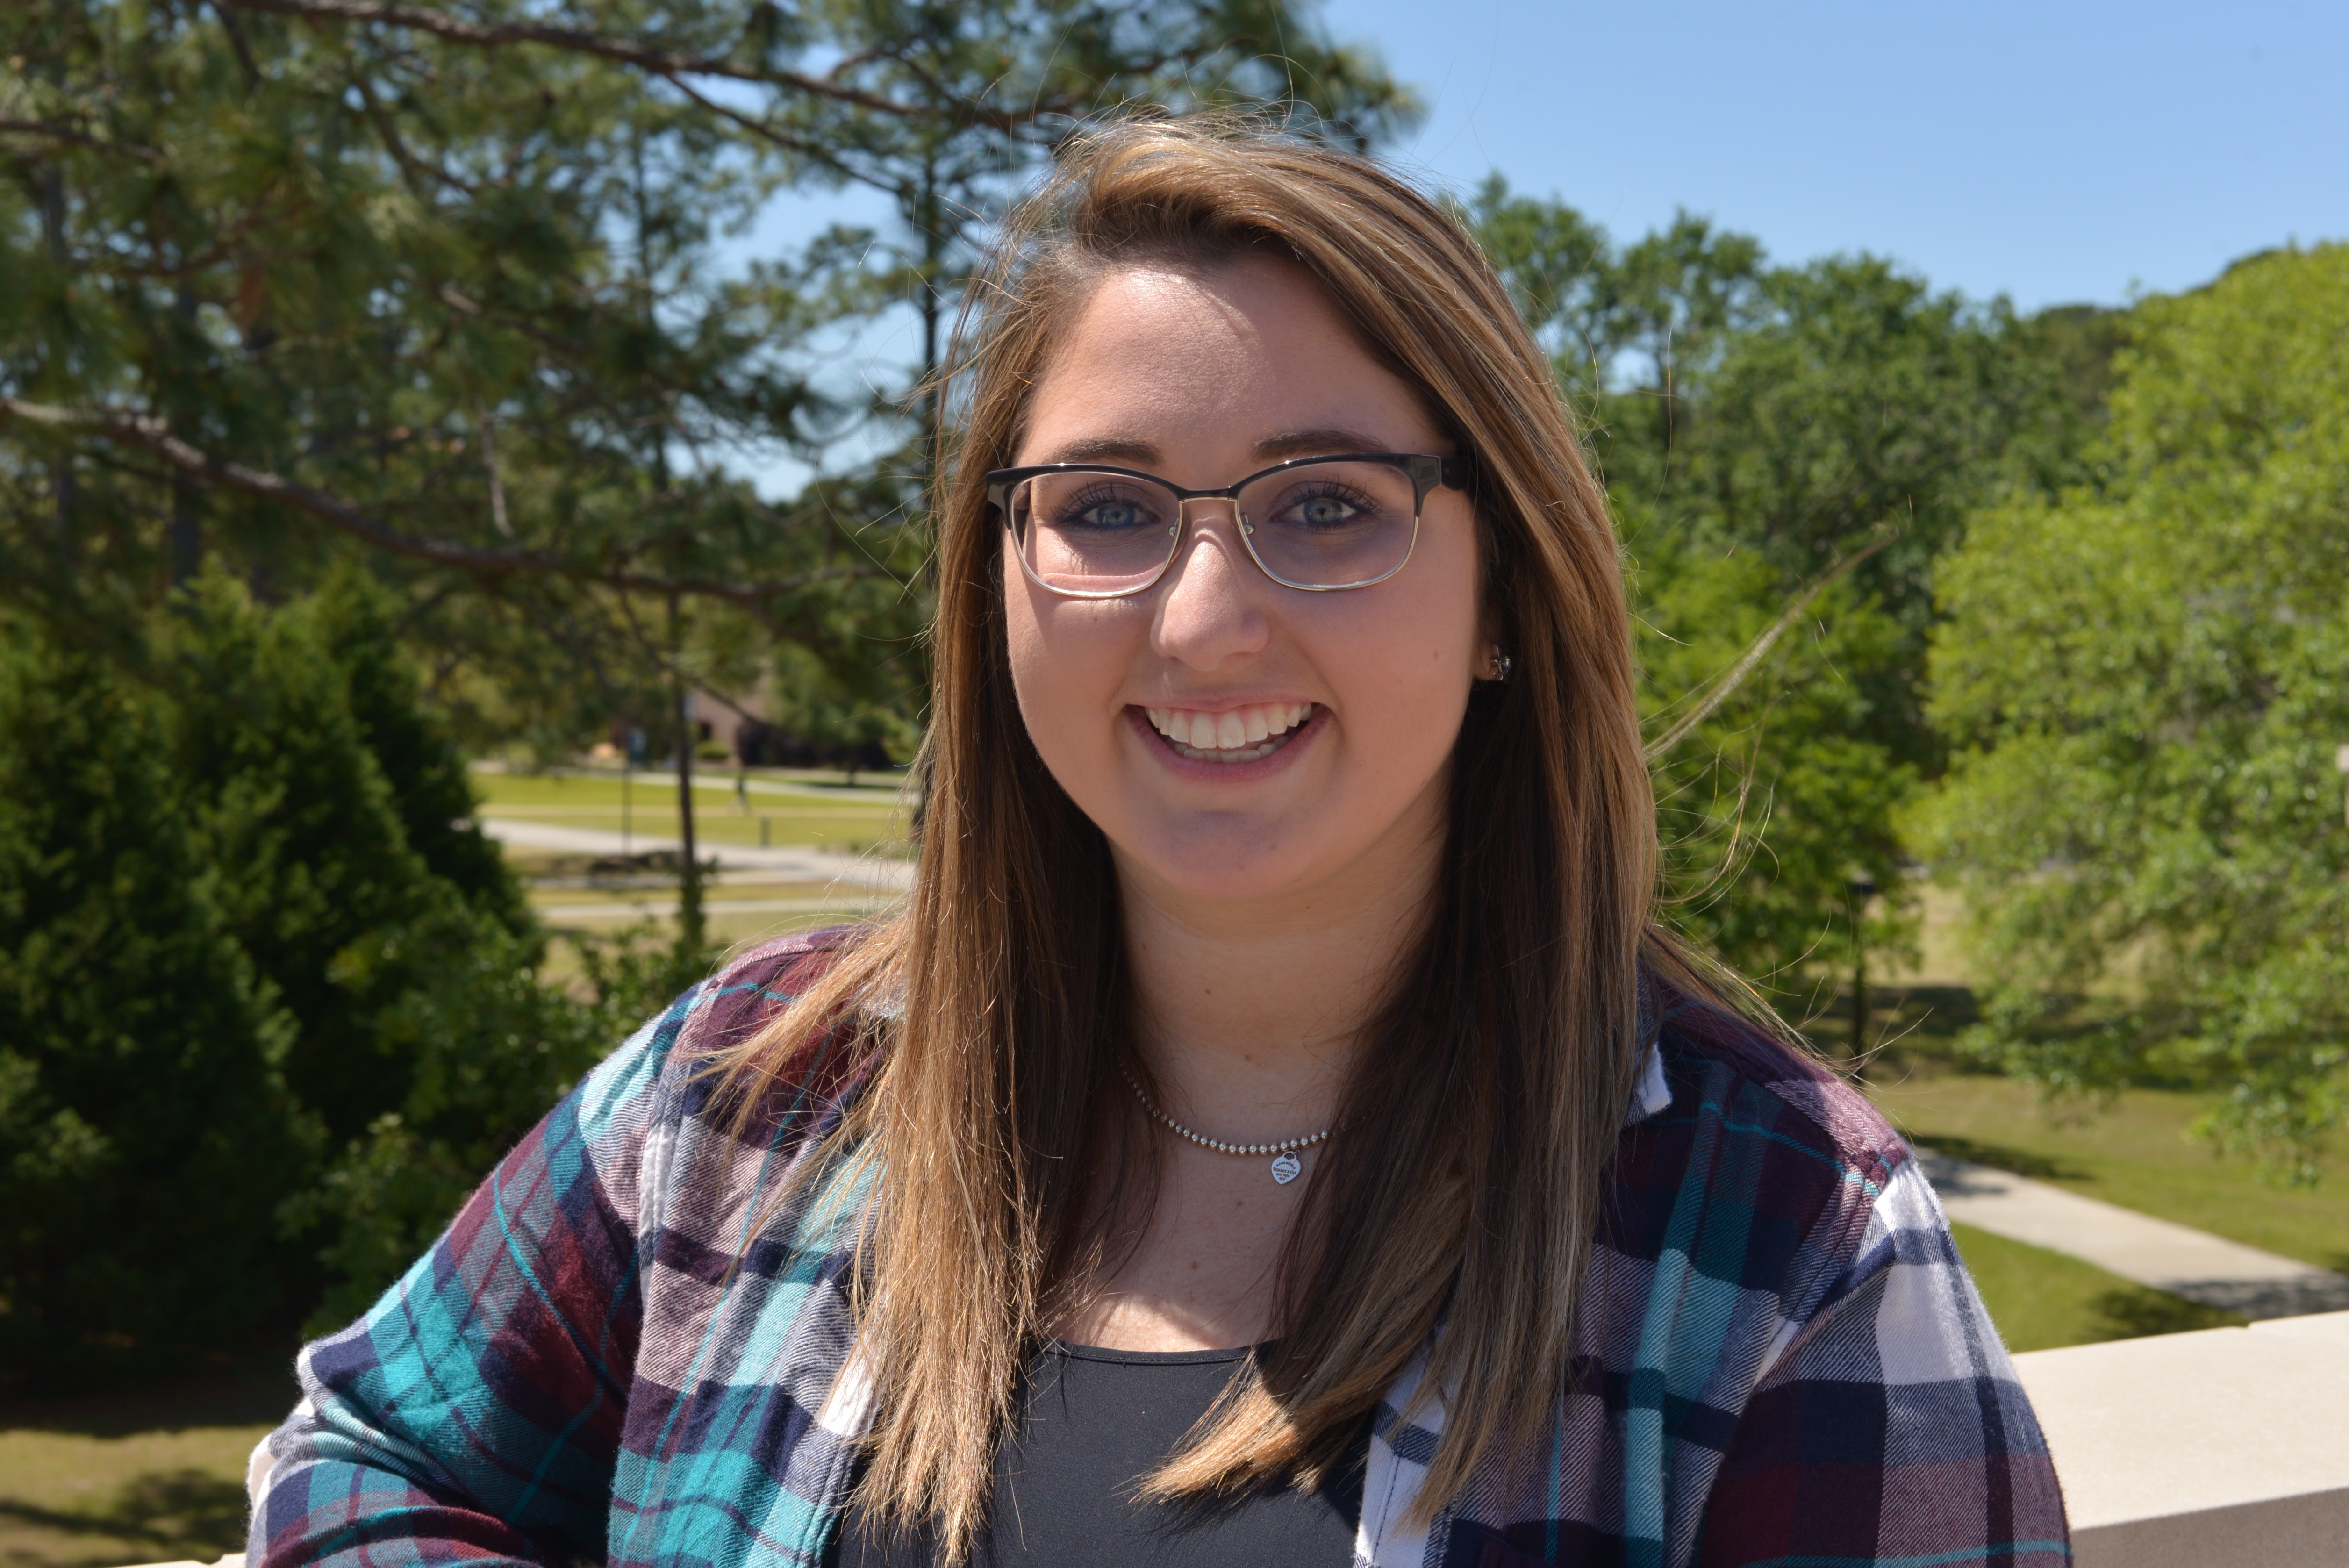 College of Coastal Georgia student Macy Patten discusses how her experience at the College has been life changing.